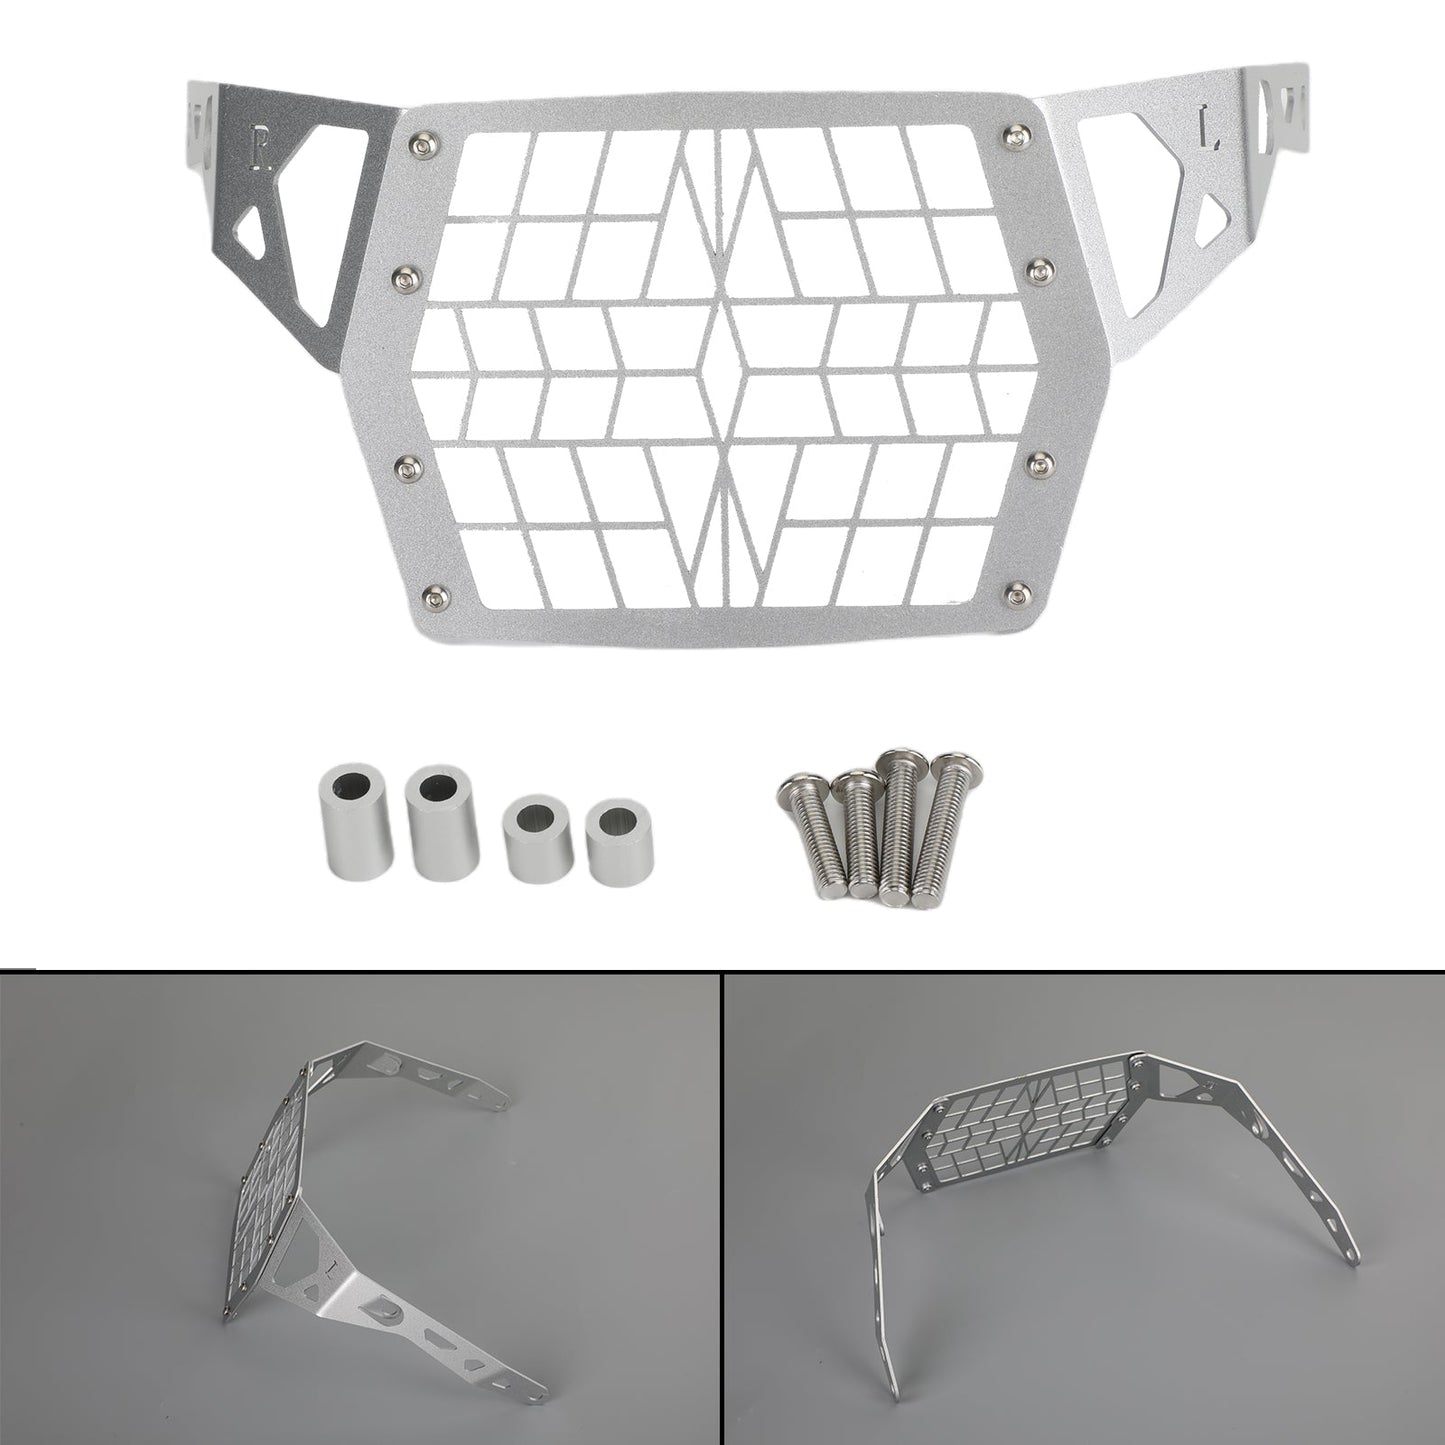 Headlight Grille Guard Cover Protector Fit For Suzuki Dl1050 Xt A 19+,Clear